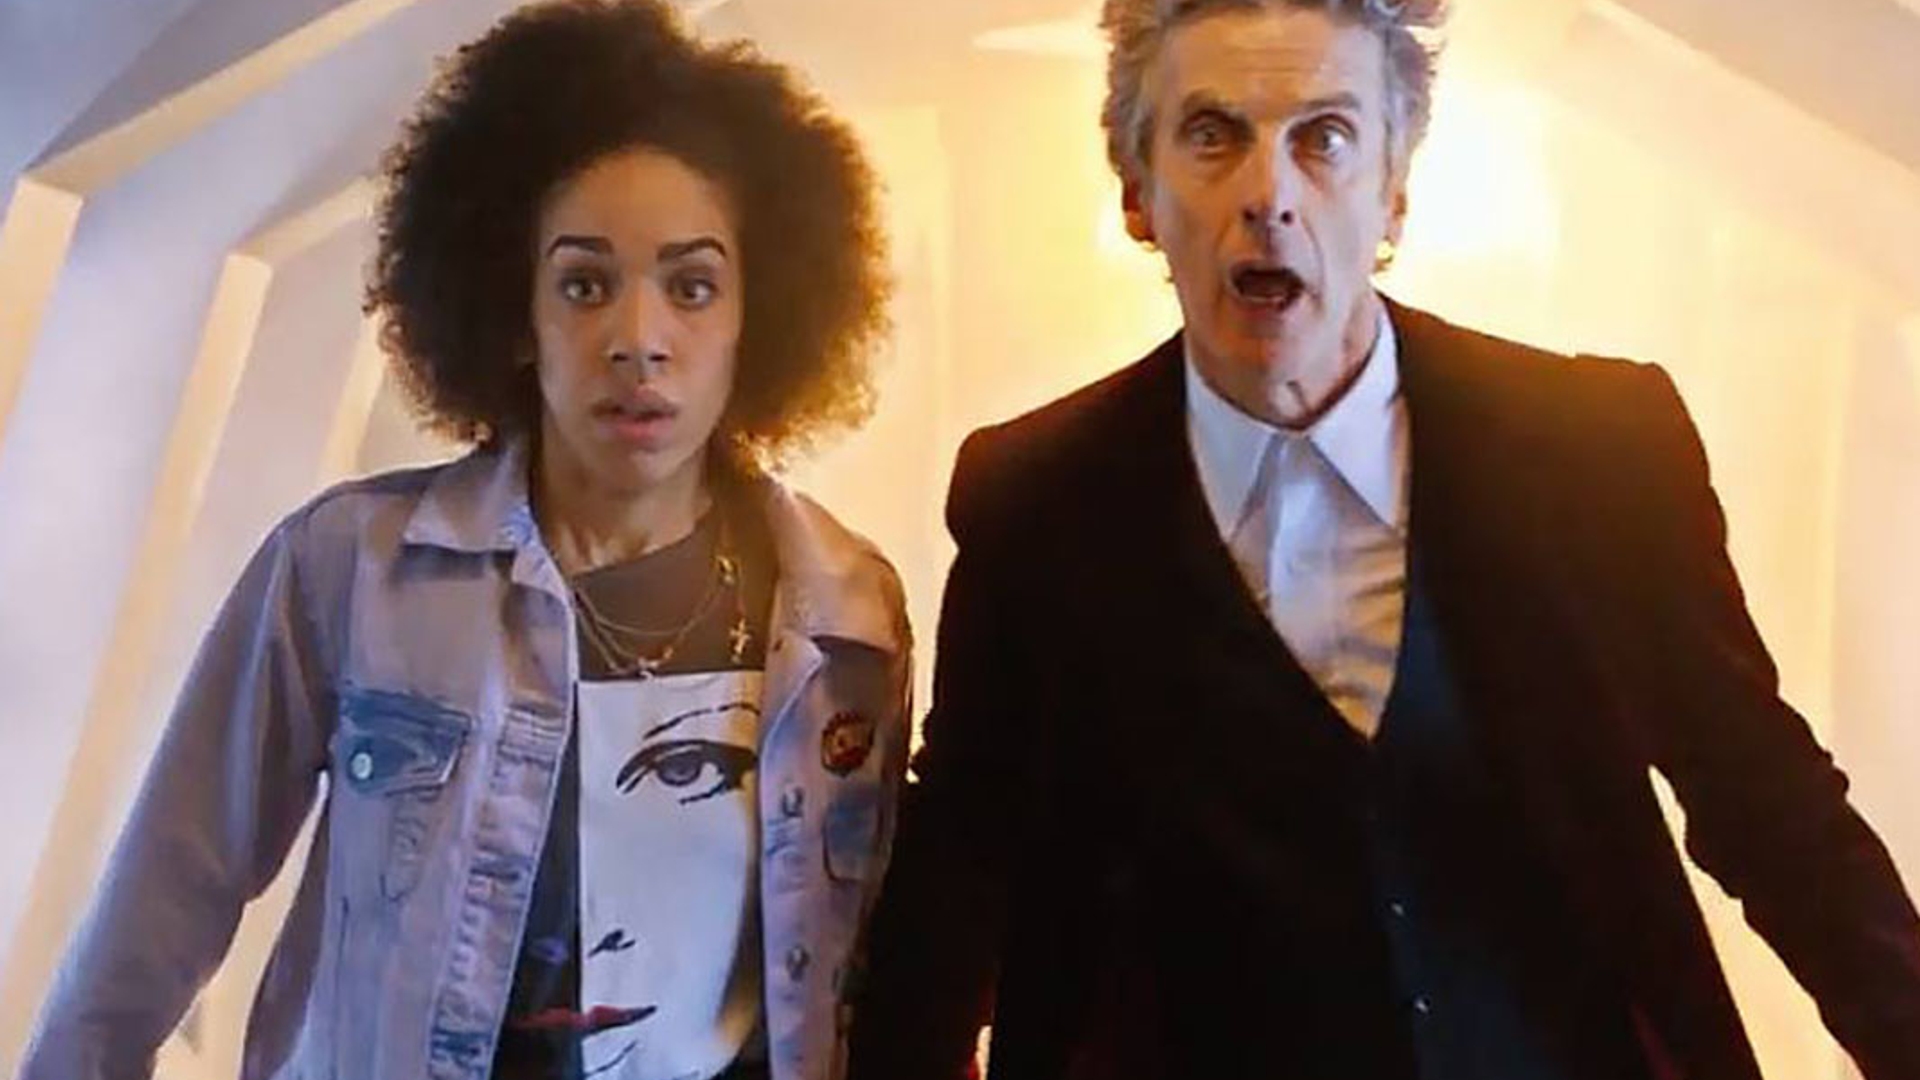 Doctor-Who-played-by-Peter-Capaldi-and-Bill-his-companion-played-by-Pearl-Mackie-BBC-America